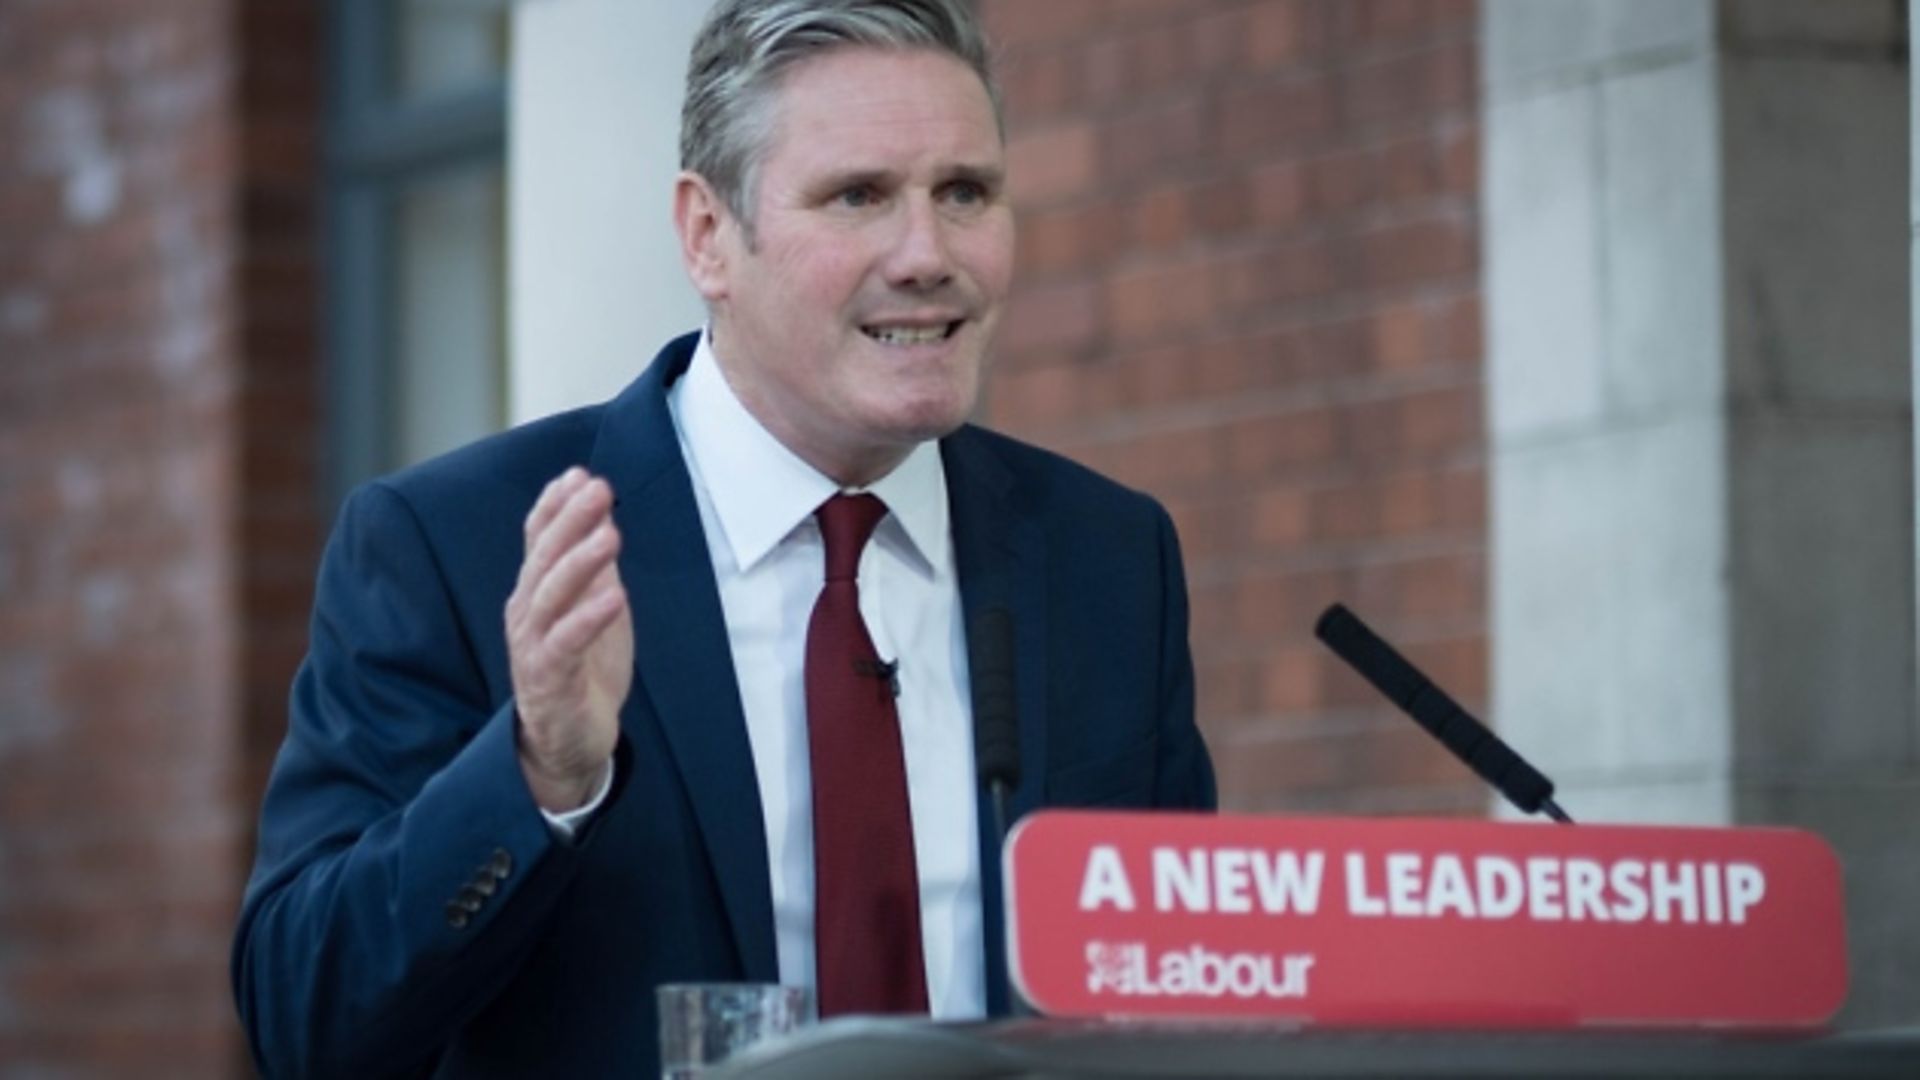 Labour leader Sir Keir Starmer delivers his keynote speech during the party's online conference from the Danum Gallery, Library and Museum in Doncaster. - Credit: Stefan Rousseau/PA Wire.